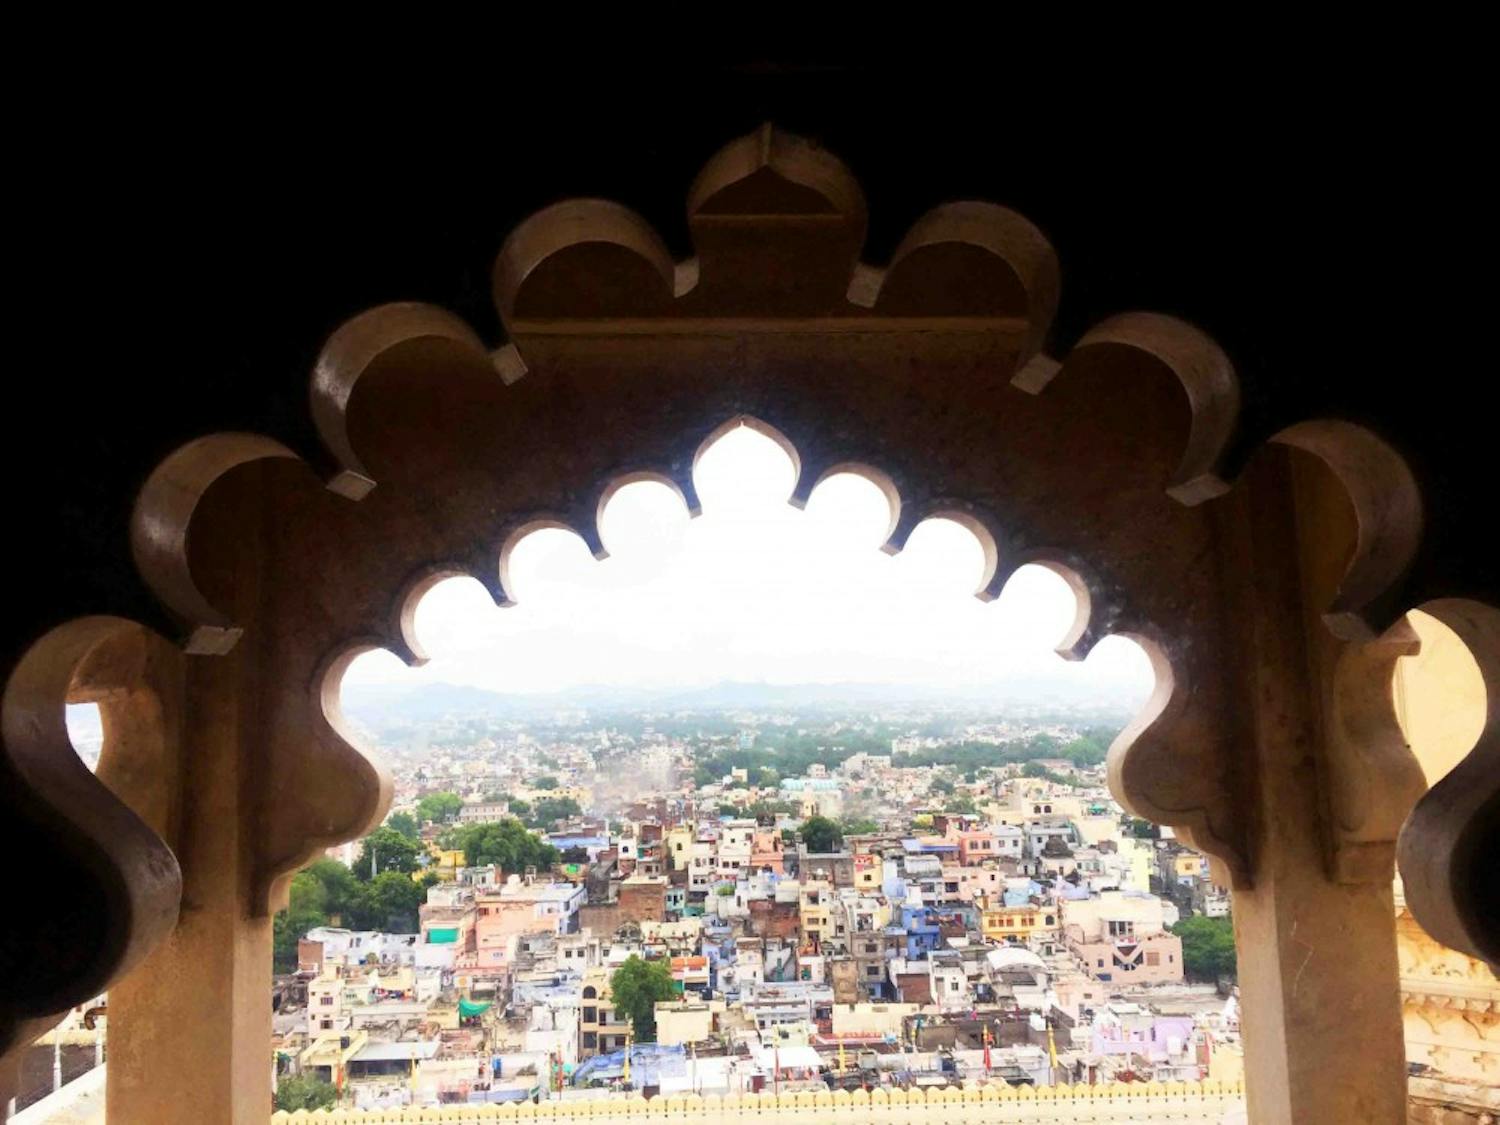 Ahmedabad, India is home to one of the newest DukeEngage programs, involving students in the work of a nonprofit organization.